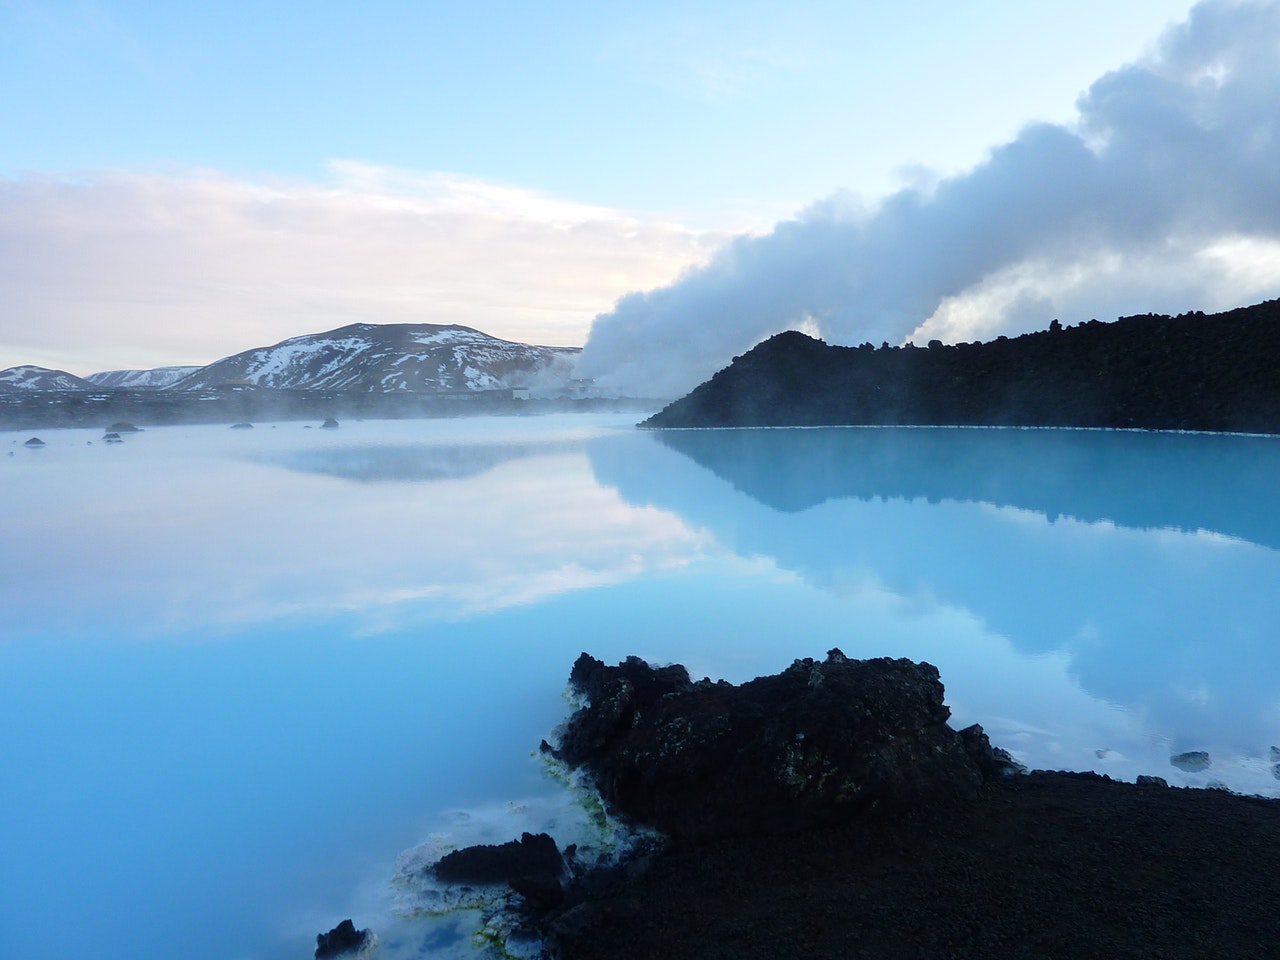 women's guide to Iceland from Wanderful - image of the natural beauty